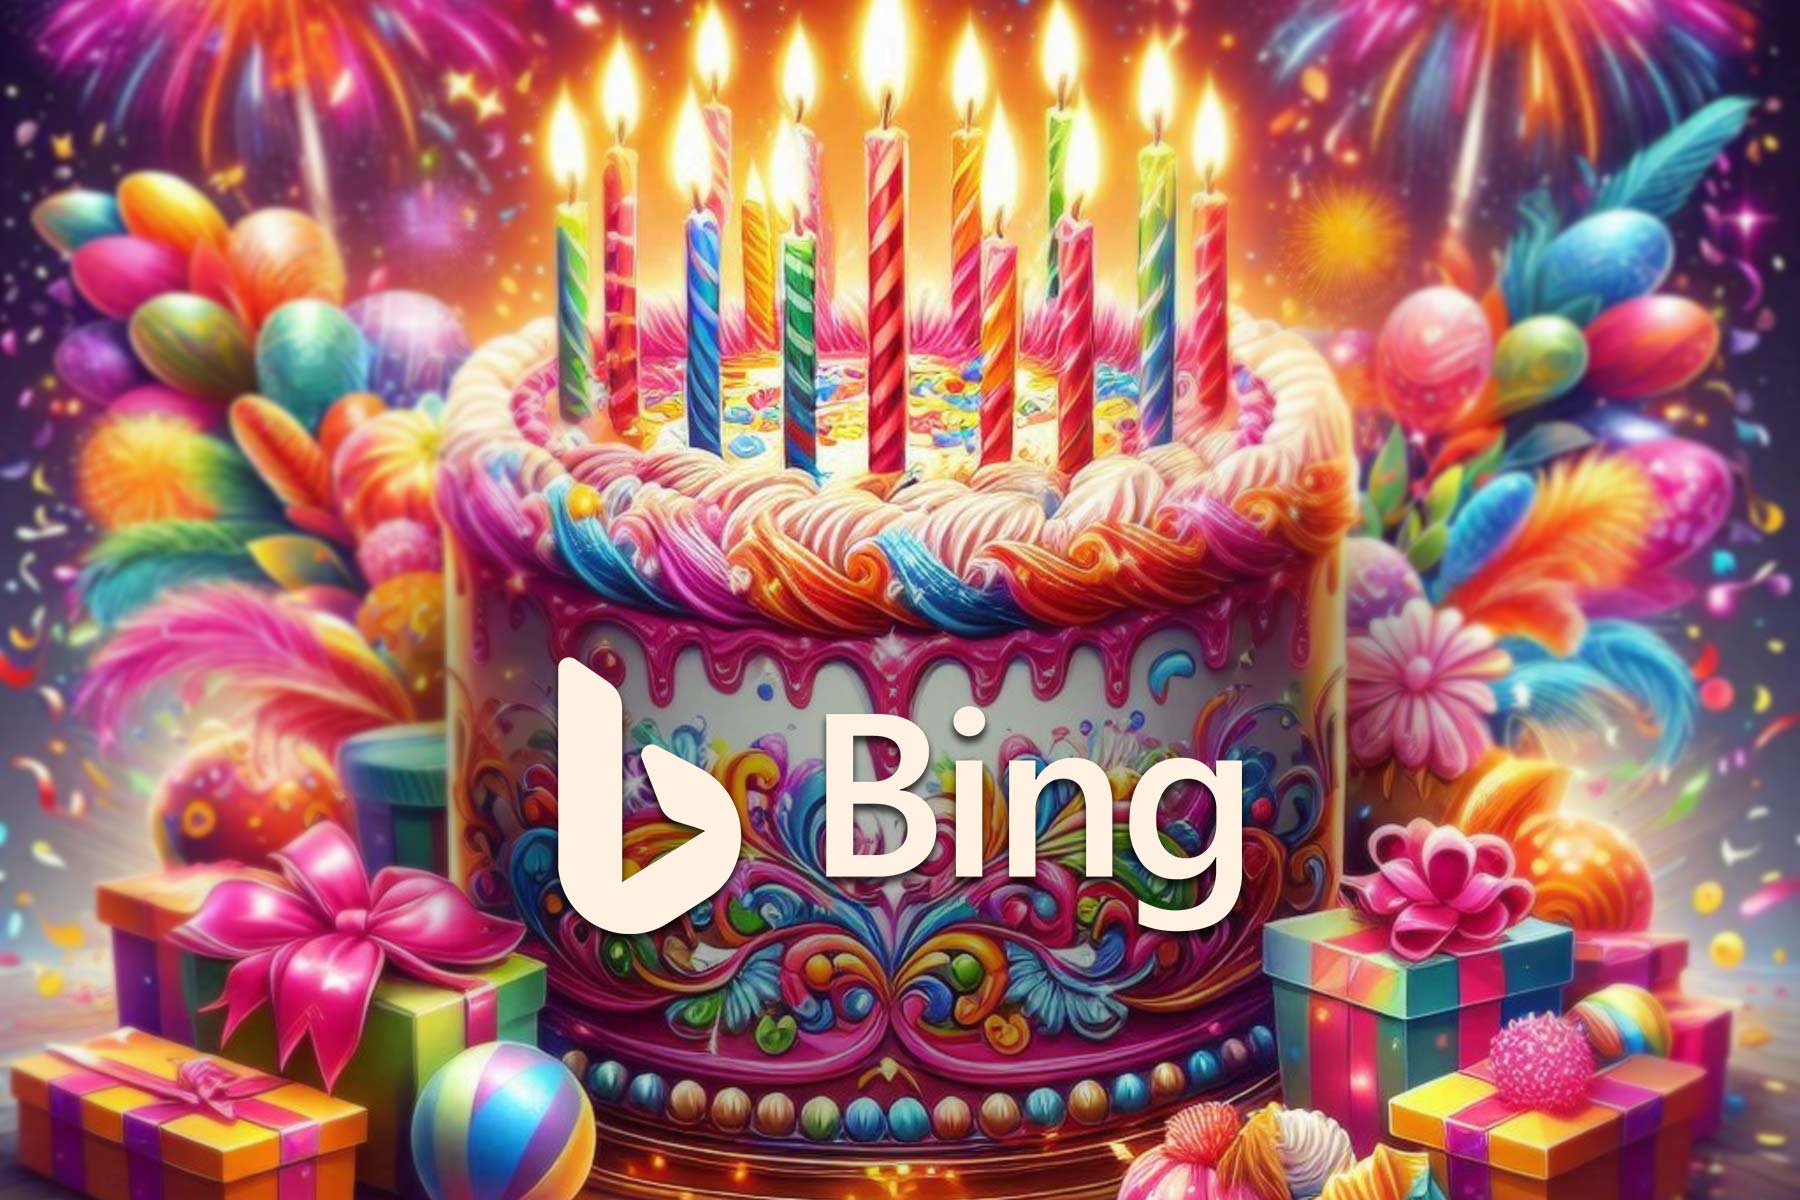 Microsoft Bing turns 15: Here’s a brief look at its past